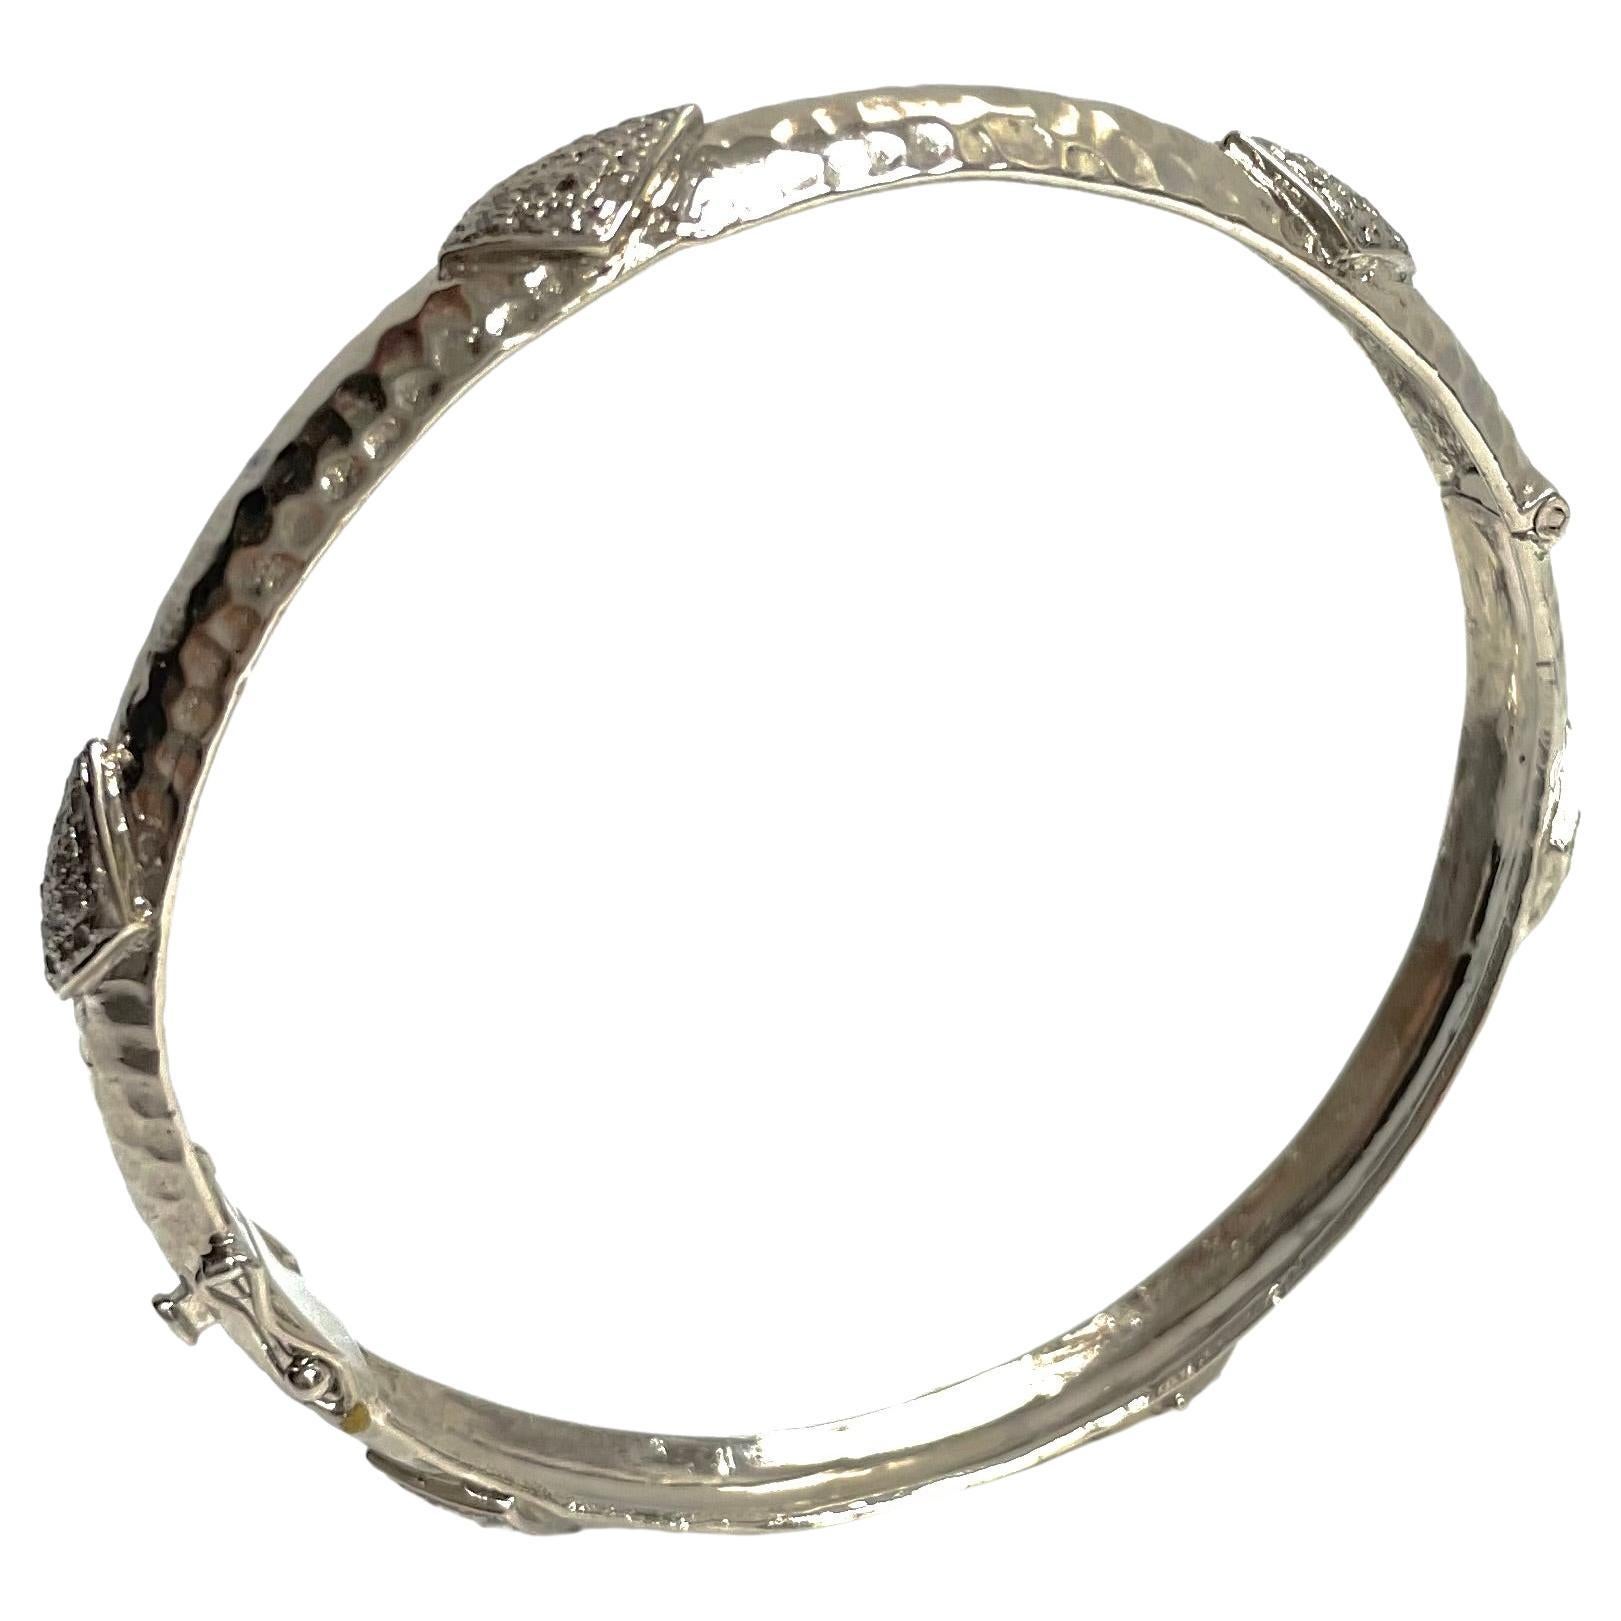 Description
Your style comes to life wearing this unique, edgy and timeless sterling silver bracelet. Raised diamond shape appliques totaling 1.20 carats of pave diamonds encircle and embellish this stunning bangle. Artistically hammered by hand to